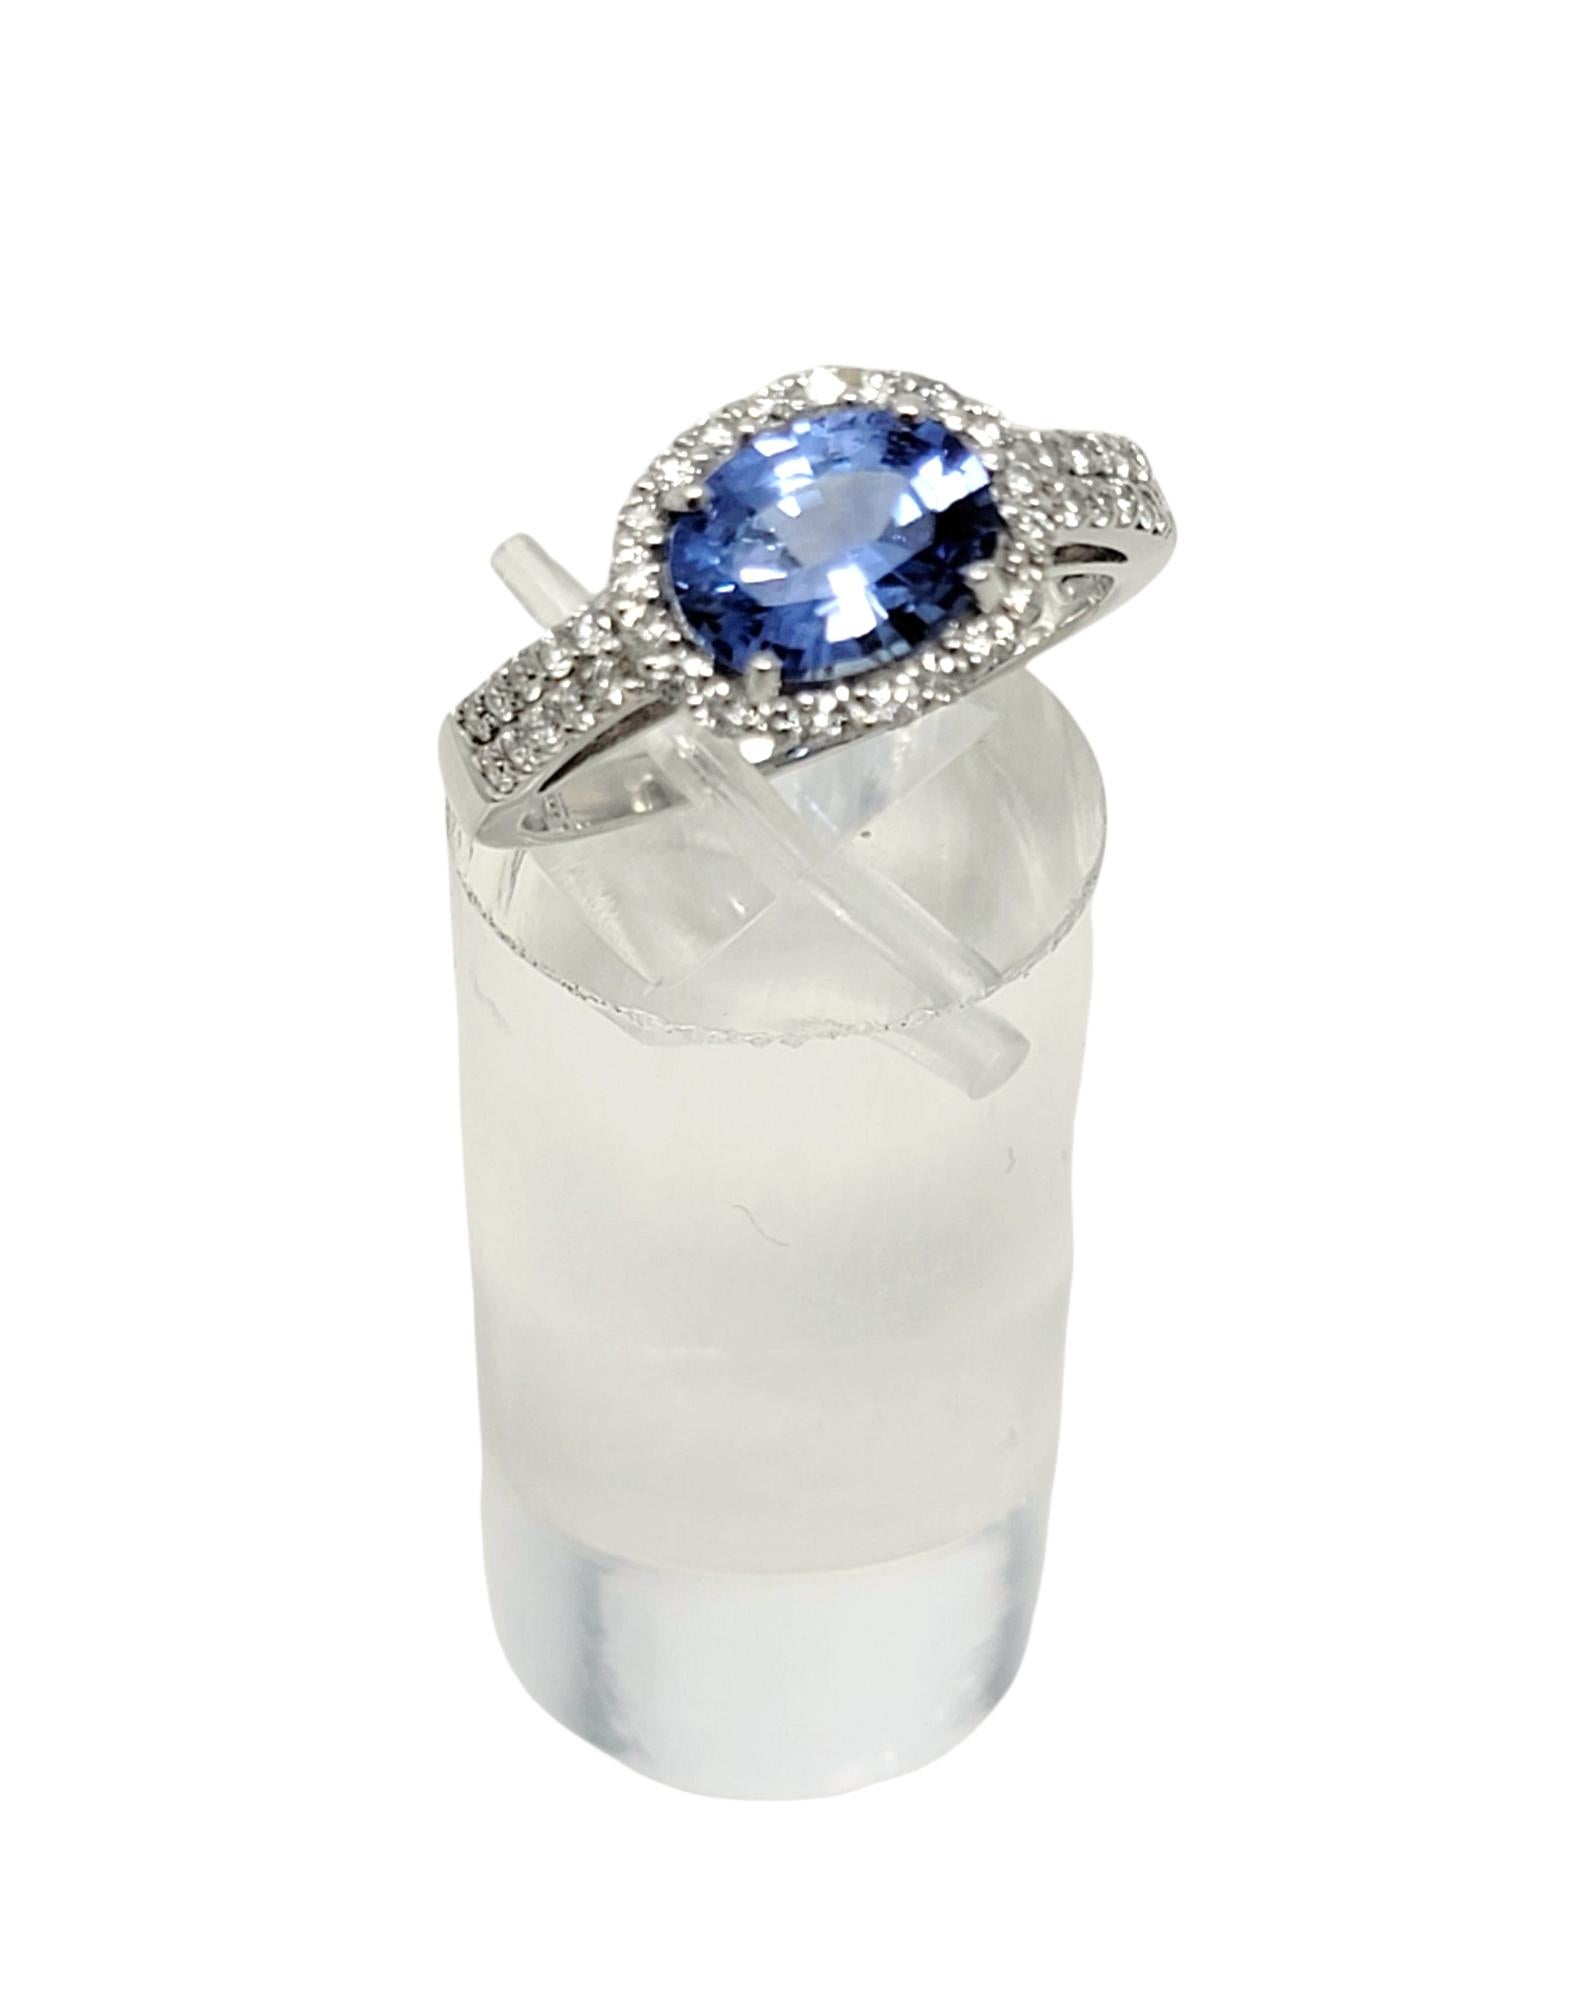 2.02 Carat Total Oval Ceylon Sapphire and Diamond Band Ring 18 Karat White Gold In Good Condition For Sale In Scottsdale, AZ